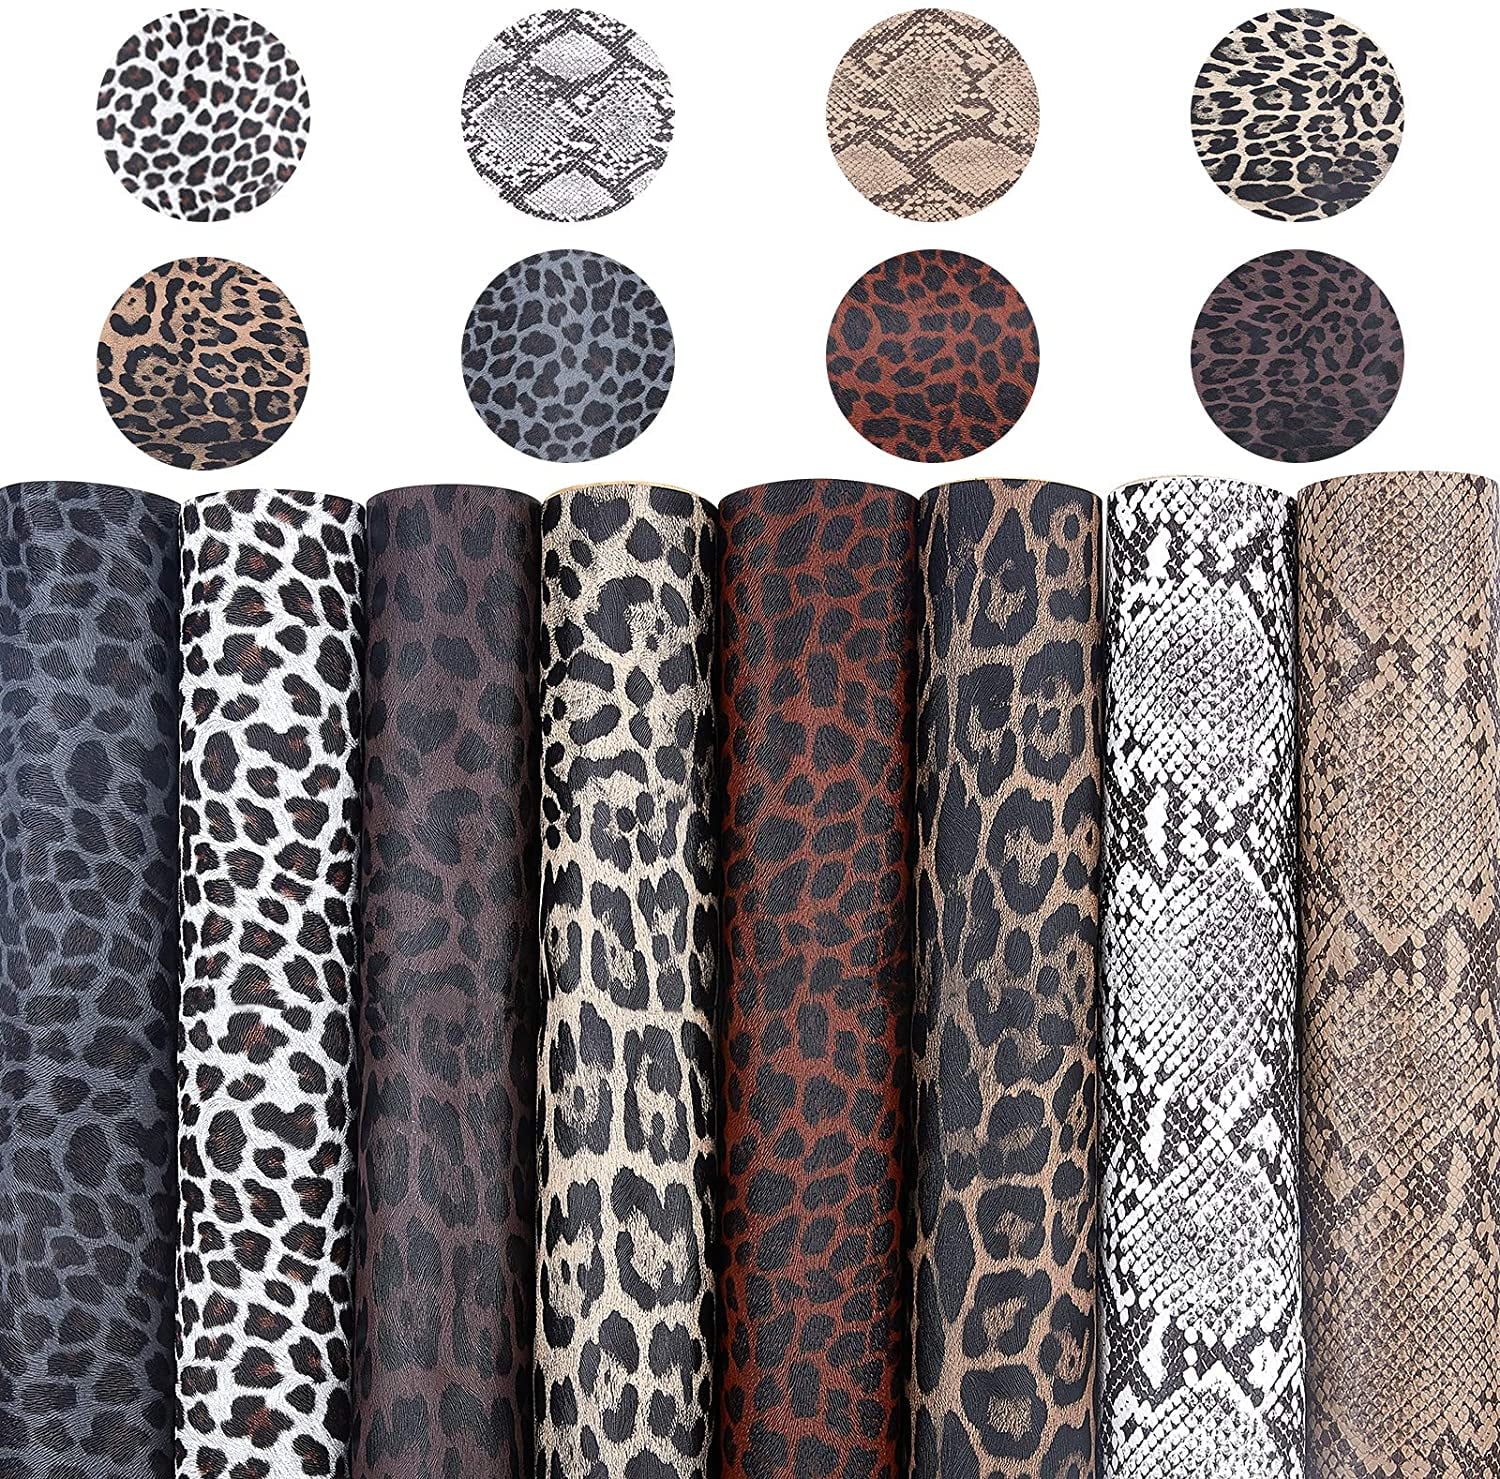 Printed Faux Leather Sheet Leopard Pattern Synthetic Leather Self-Adhesive  Back for Earring,Jewelry Making,Purse,Scrapbook Pages,Pencil Cases, Crafts